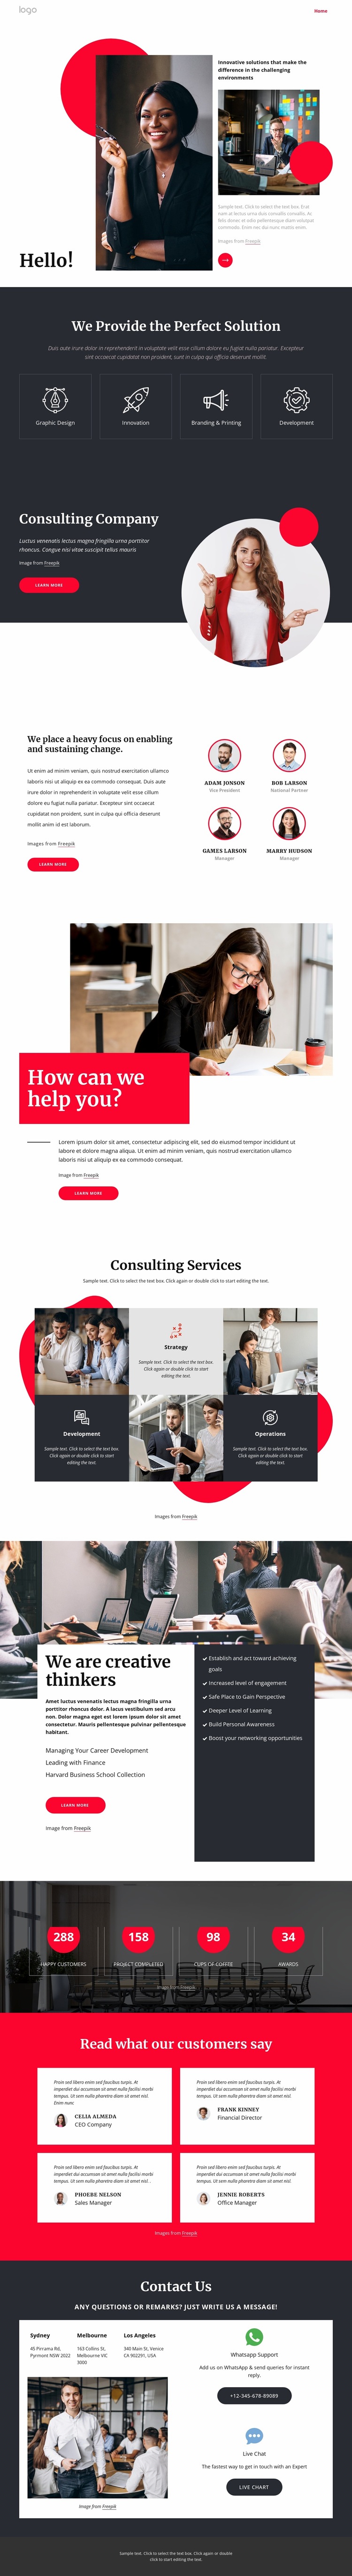 Consulting company NYC Website Builder Templates